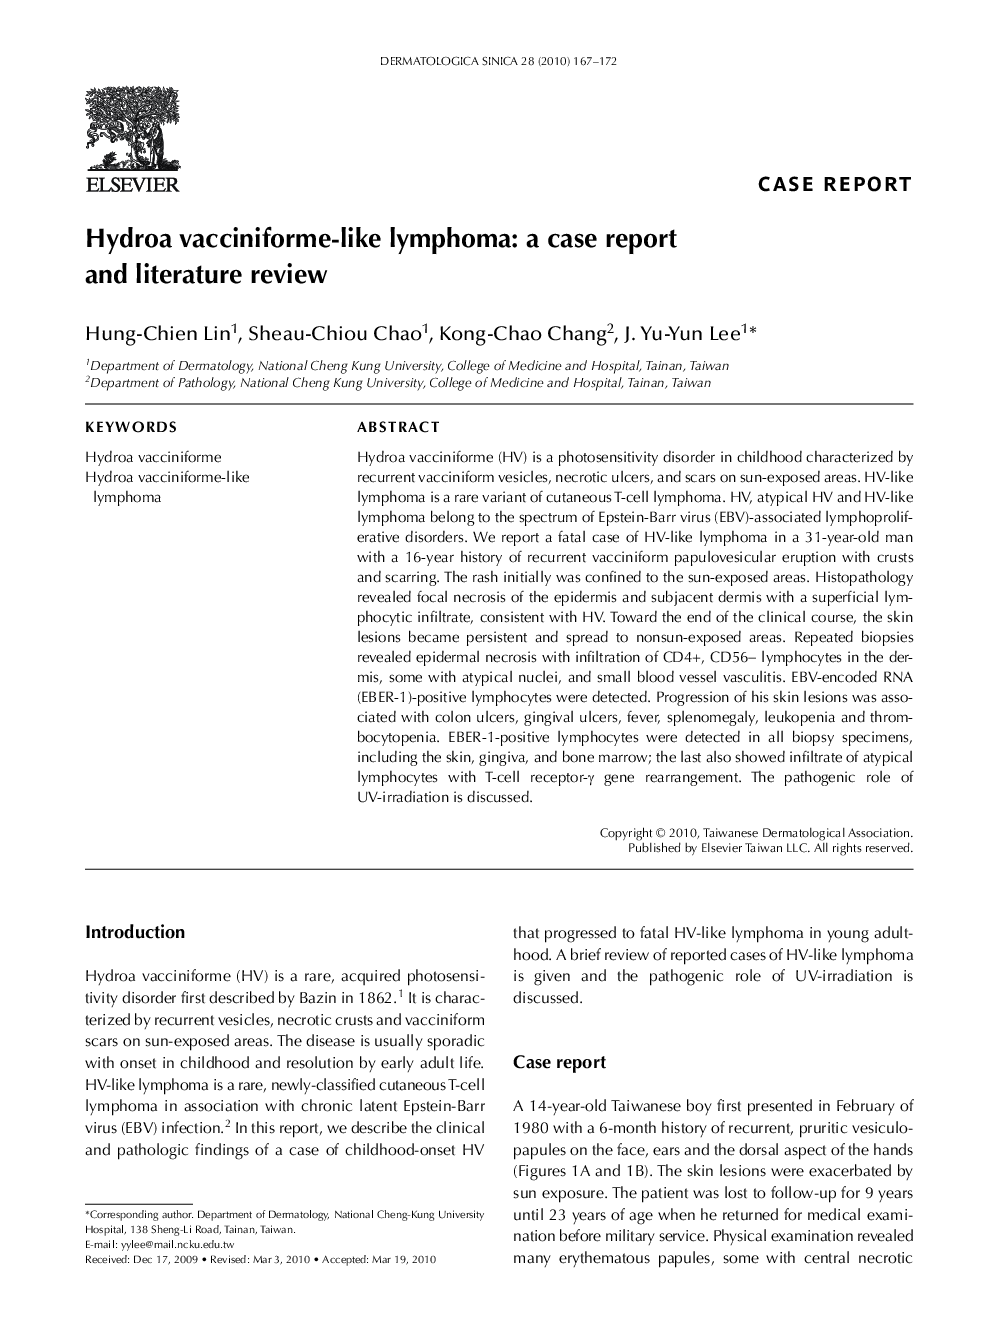 Hydroa vacciniforme-like lymphoma: a case report and literature review